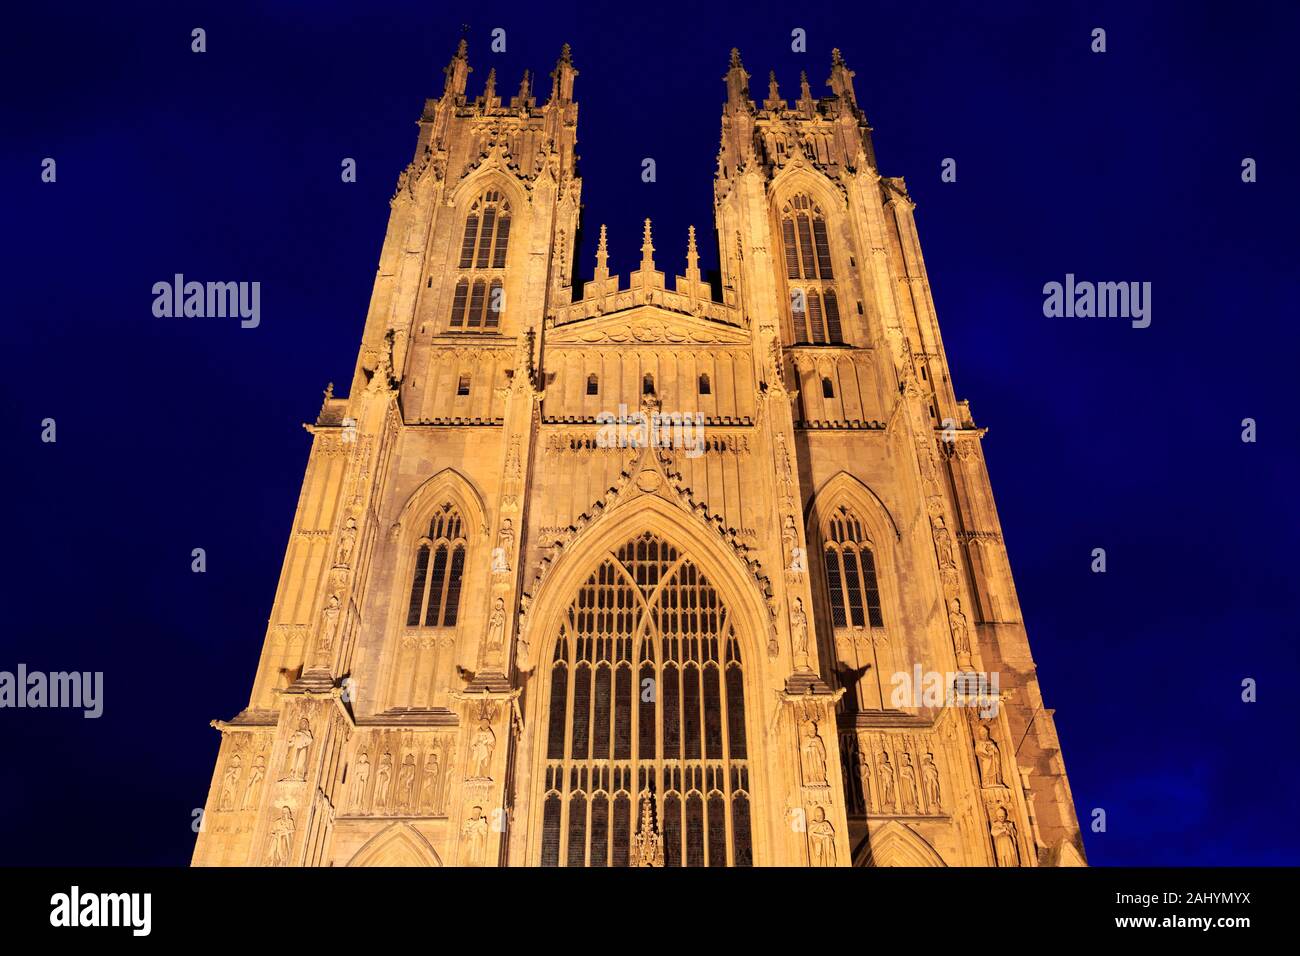 Beverley Minster at night, Beverley town, East Riding of Yorkshire, England, UK Stock Photo